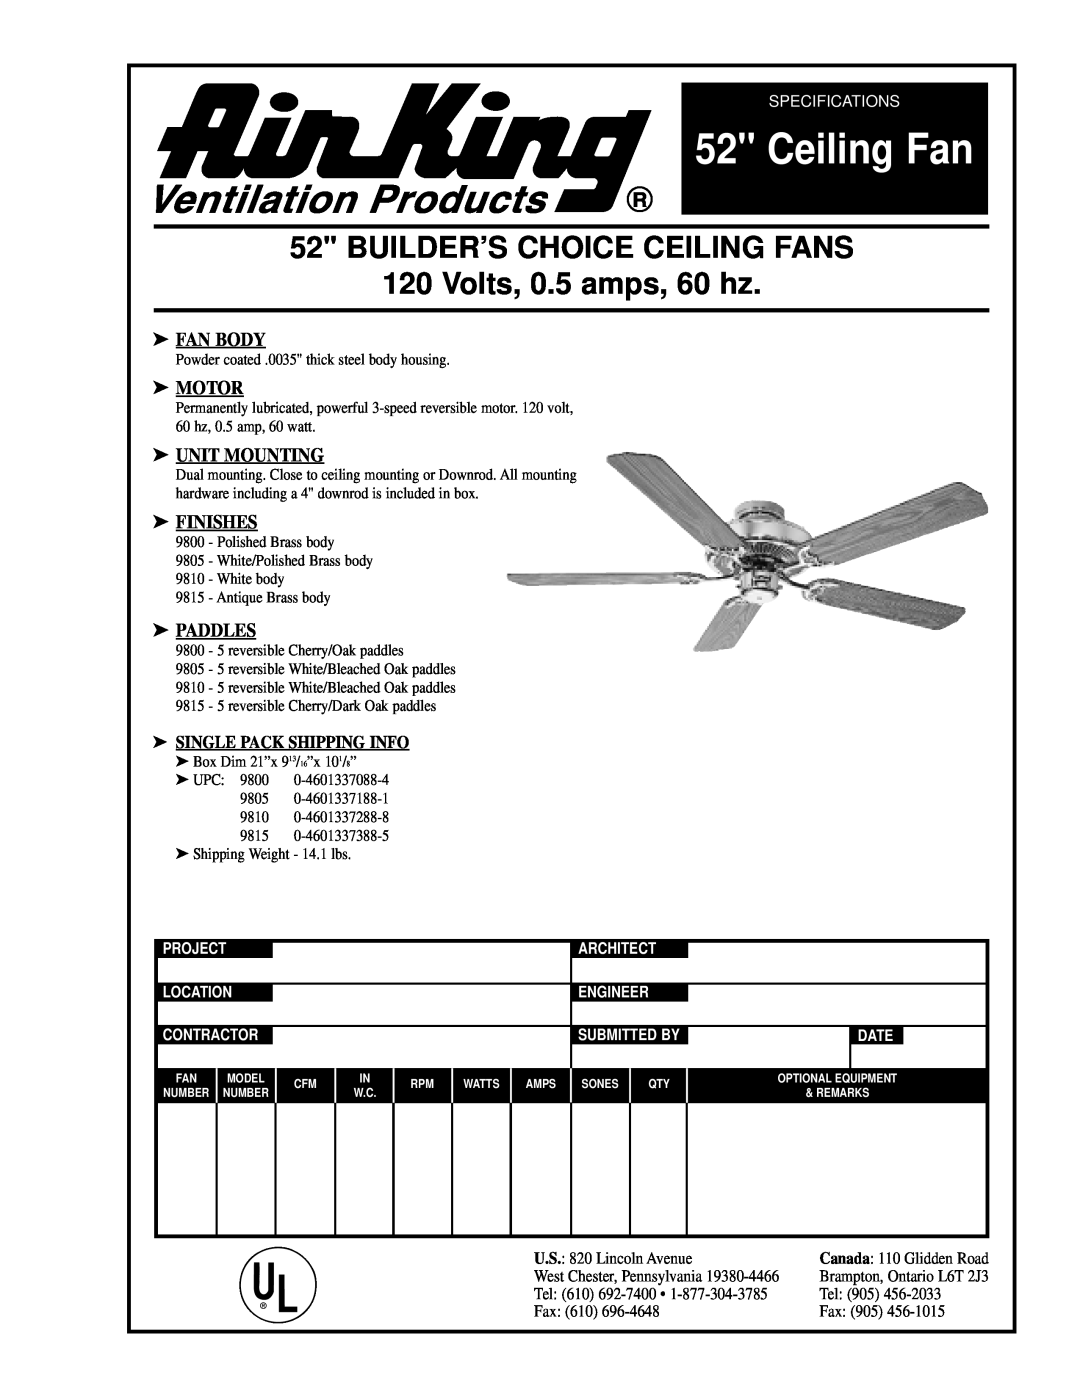 Air King 9800 specifications Ceiling Fan, BUILDER’S CHOICE CEILING FANS 120 Volts, 0.5 amps, 60 hz, F An Body, Mot Or 